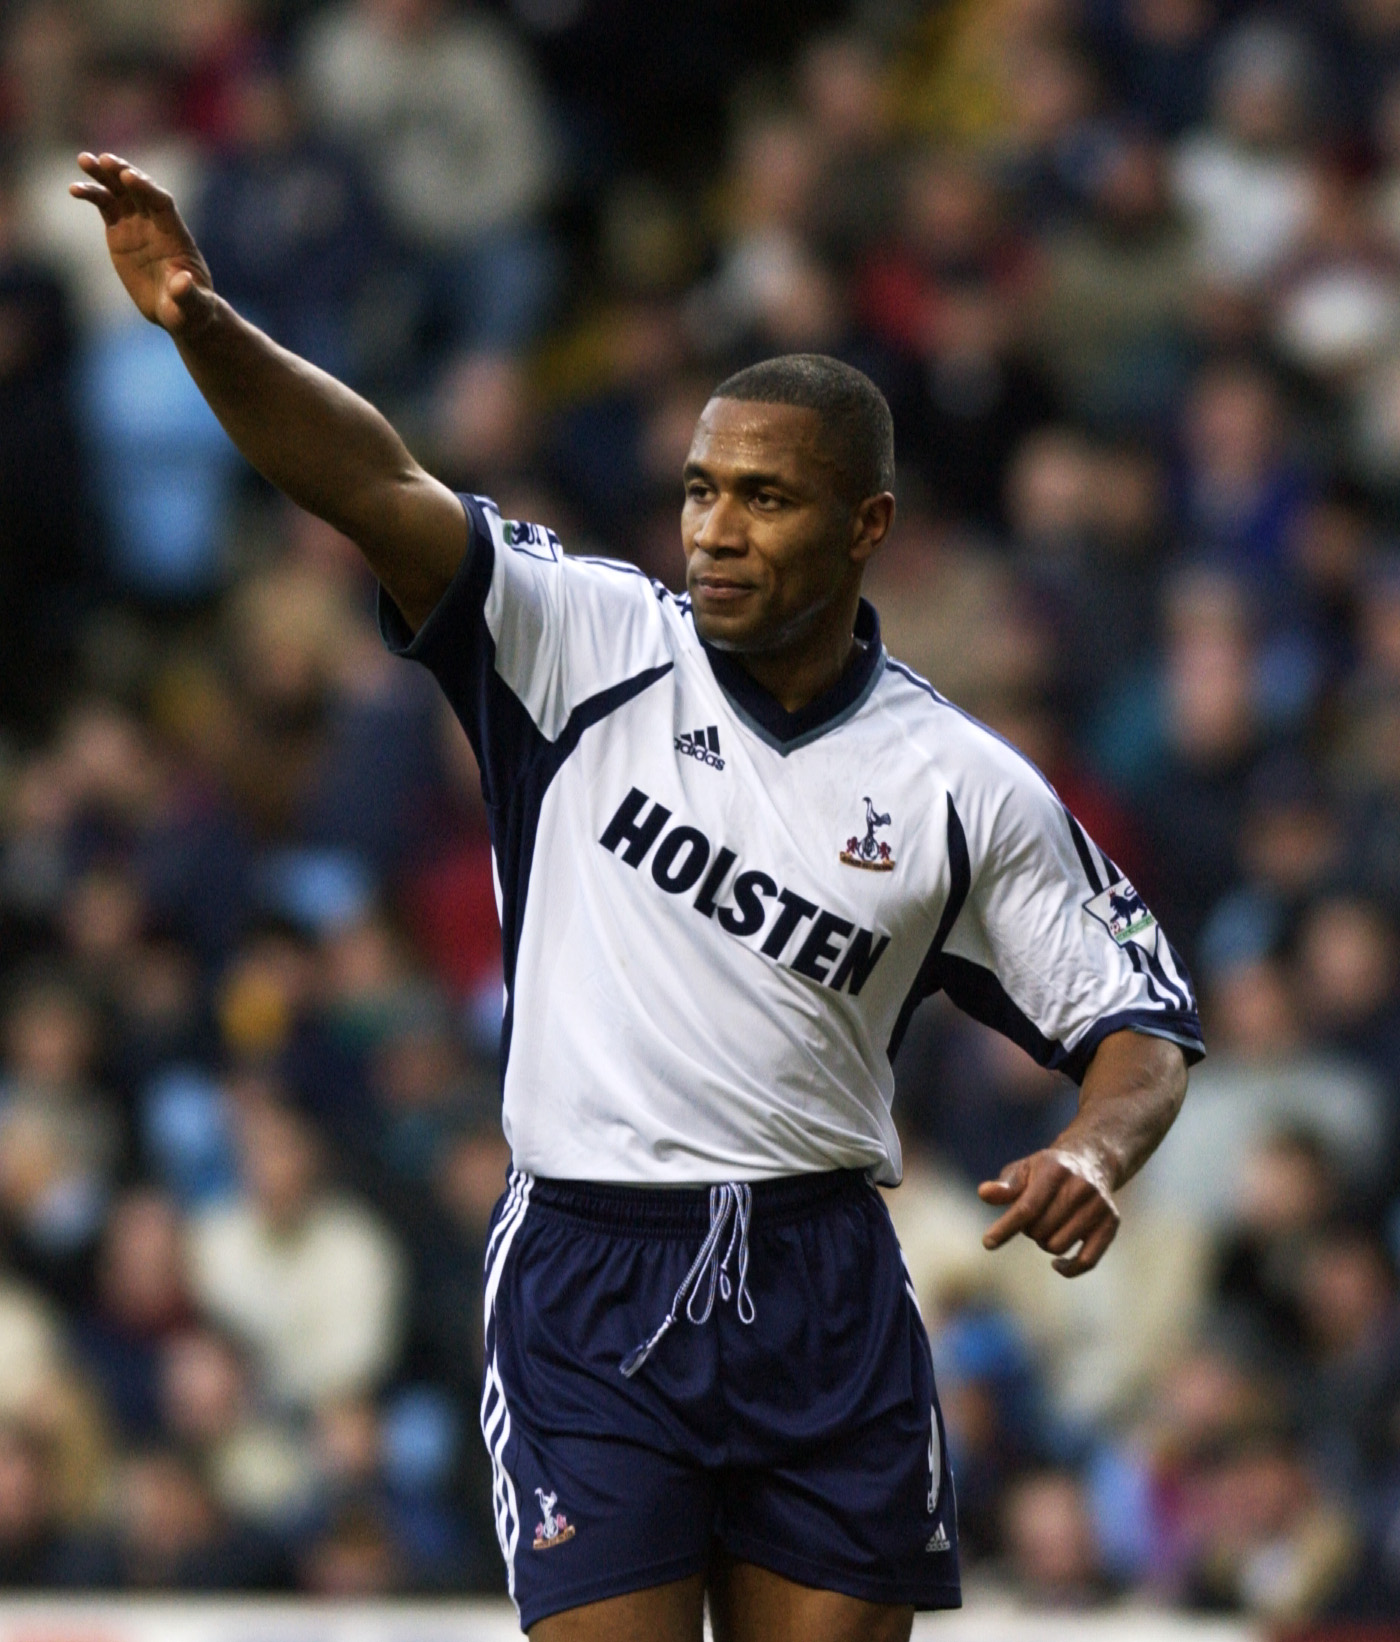 29 Dec 2001:  Les Ferdinand of Tottenham Hotspur celebrates scoring the opening goal of the match during the FA Barclaycard Premiership match against Aston Villa played at Villa Park, in Birmingham, England. The match ended in a 1-1 draw. DIGITAL IMAGE.Ma